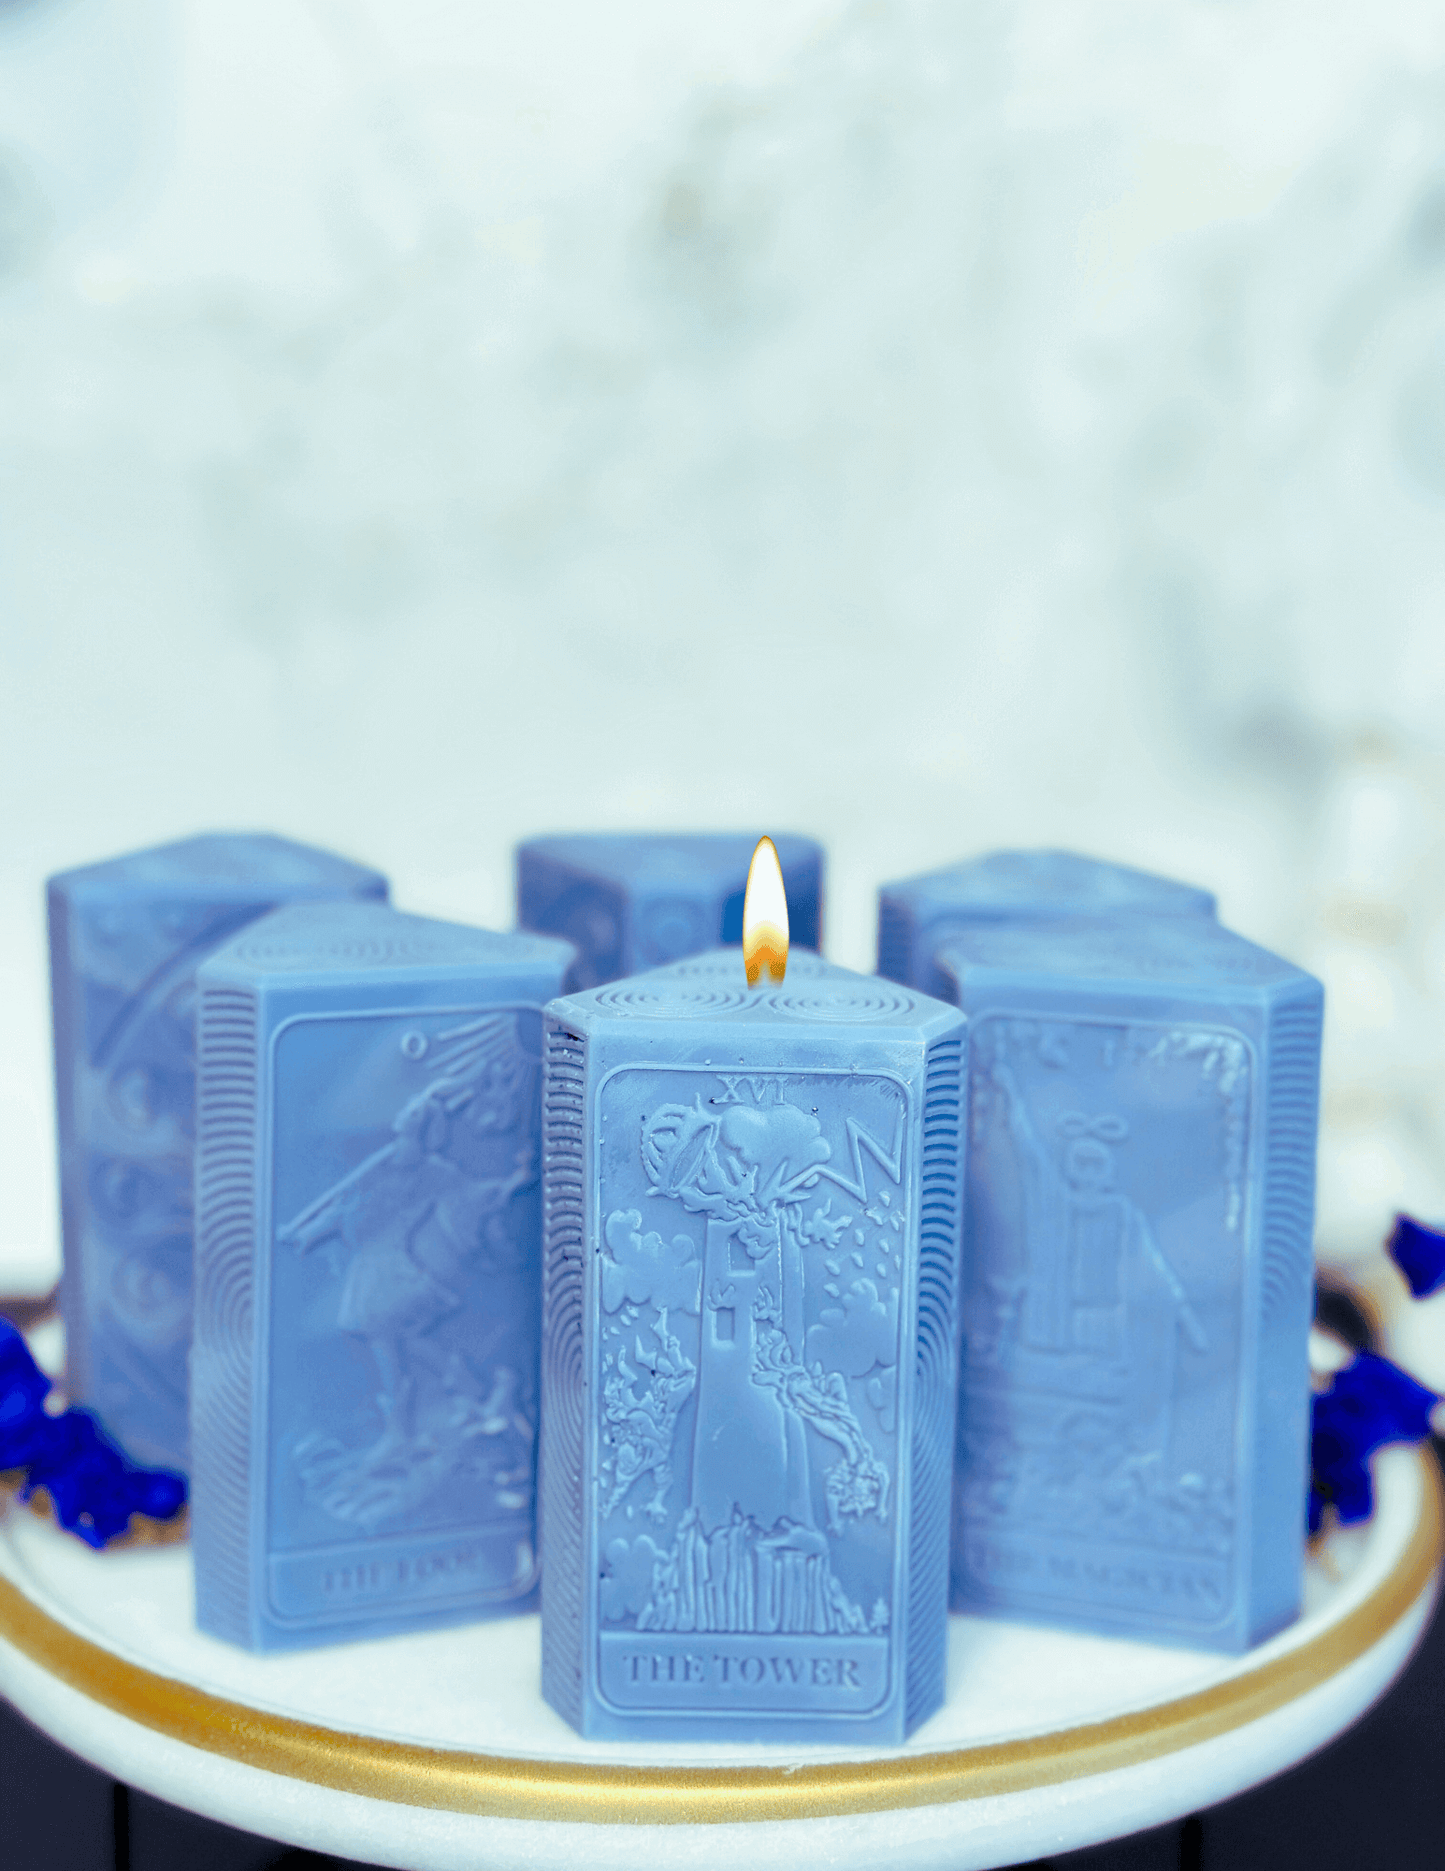 The Tower Tarot card and moon phases candle mold